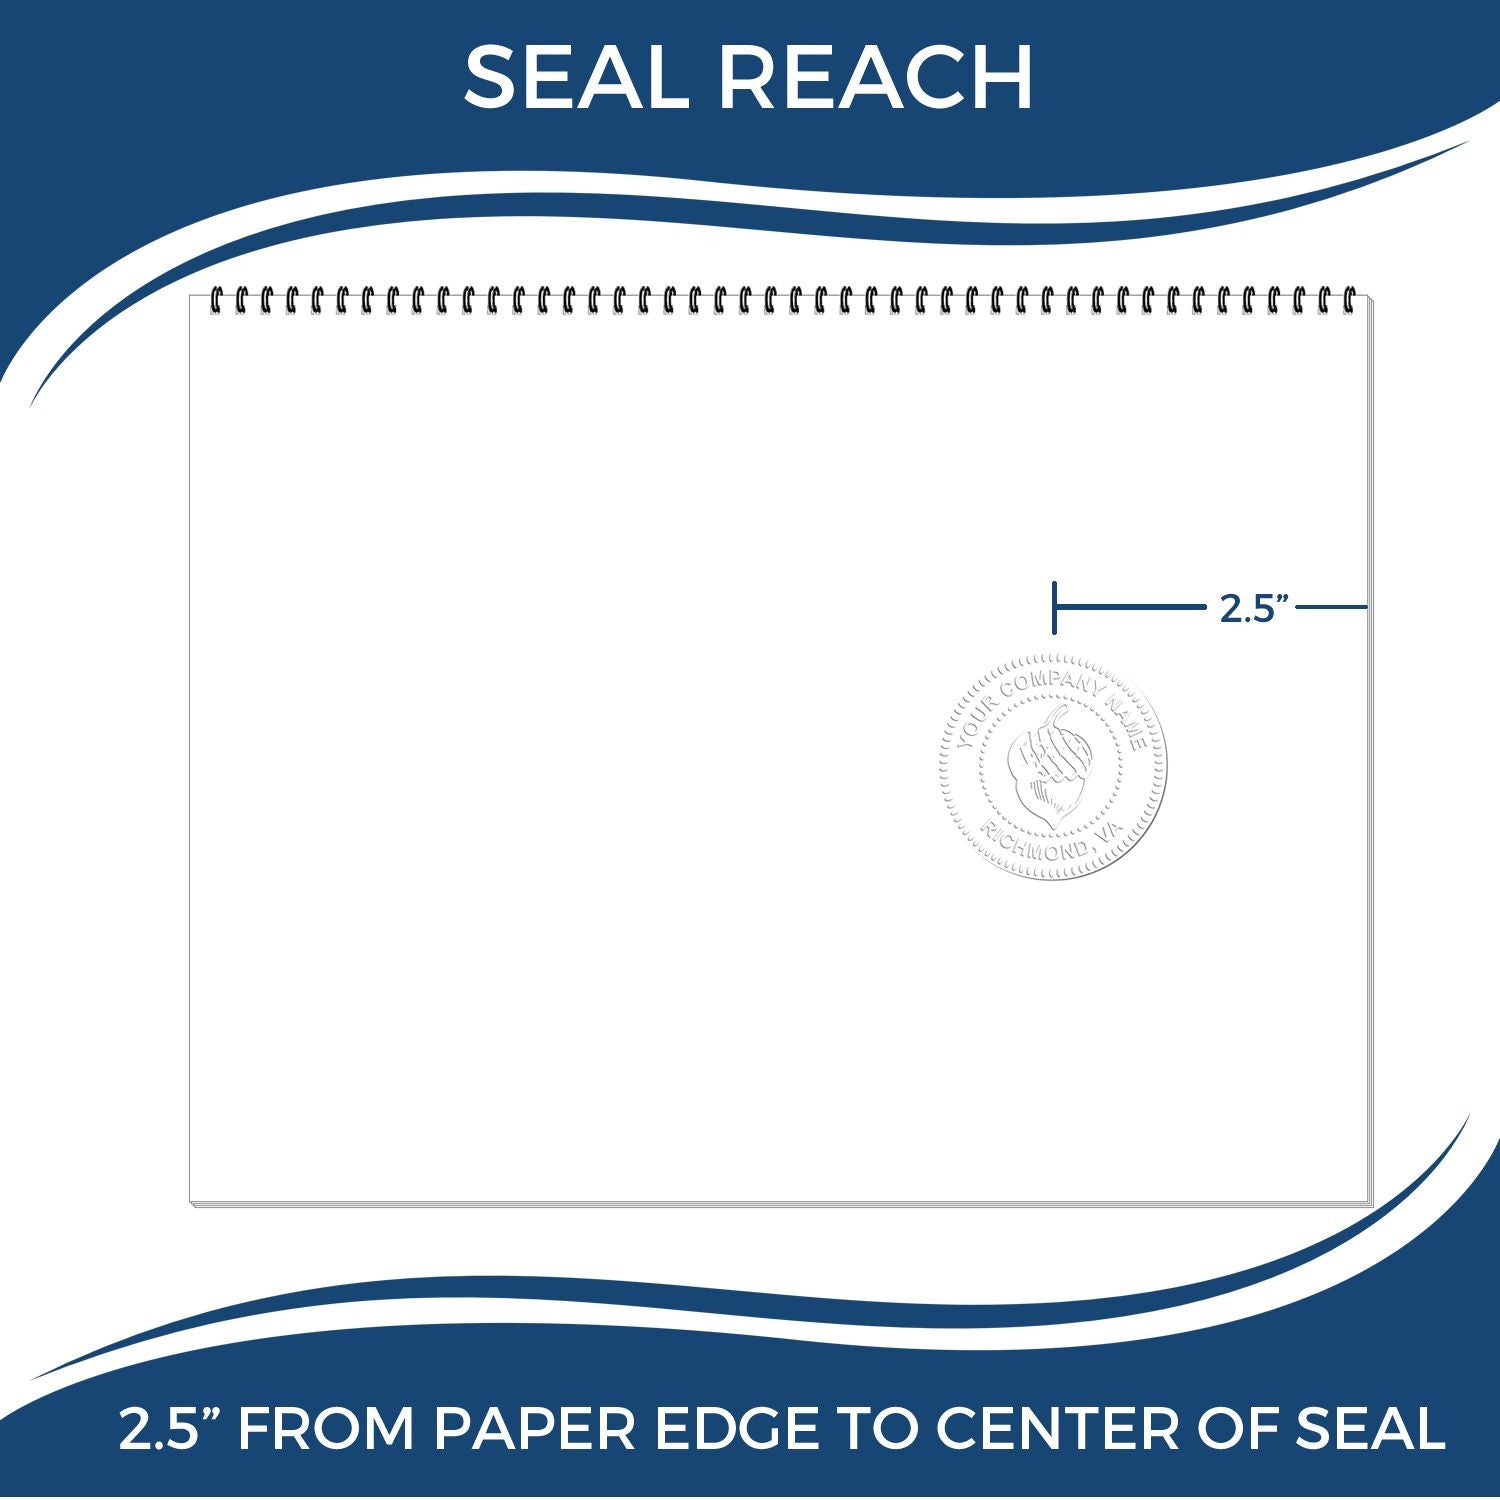 An infographic showing the seal reach which is represented by a ruler and a miniature seal image of the Heavy Duty Cast Iron Kansas Architect Embosser